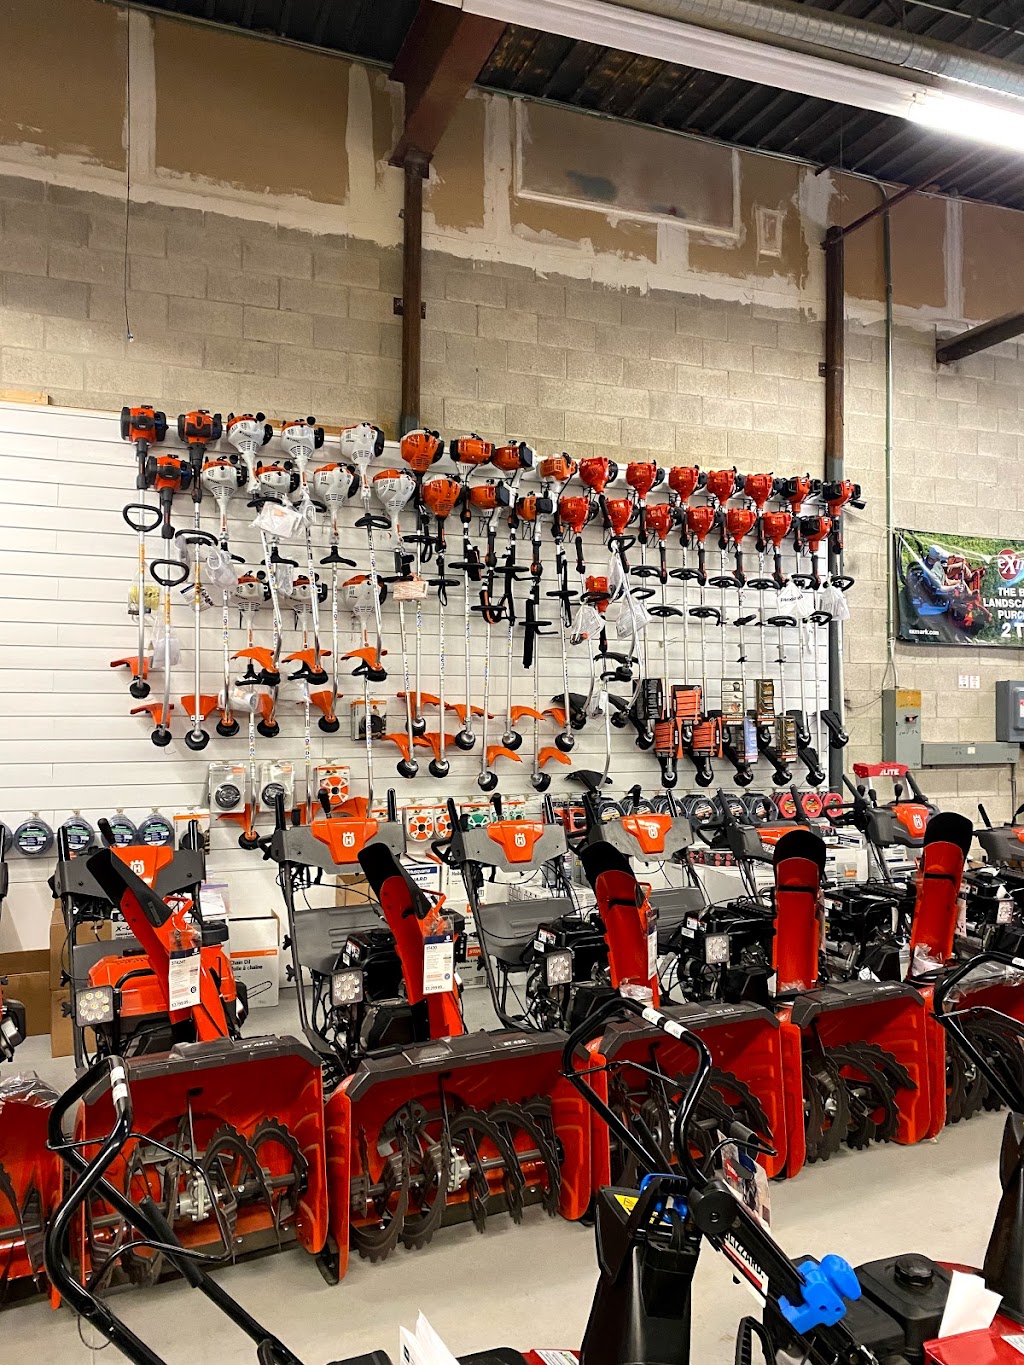 Mercer Equipment North [Sales & Service] | 28 Currie St Unit 1, Barrie, ON L4M 5N4, Canada | Phone: (705) 503-3535